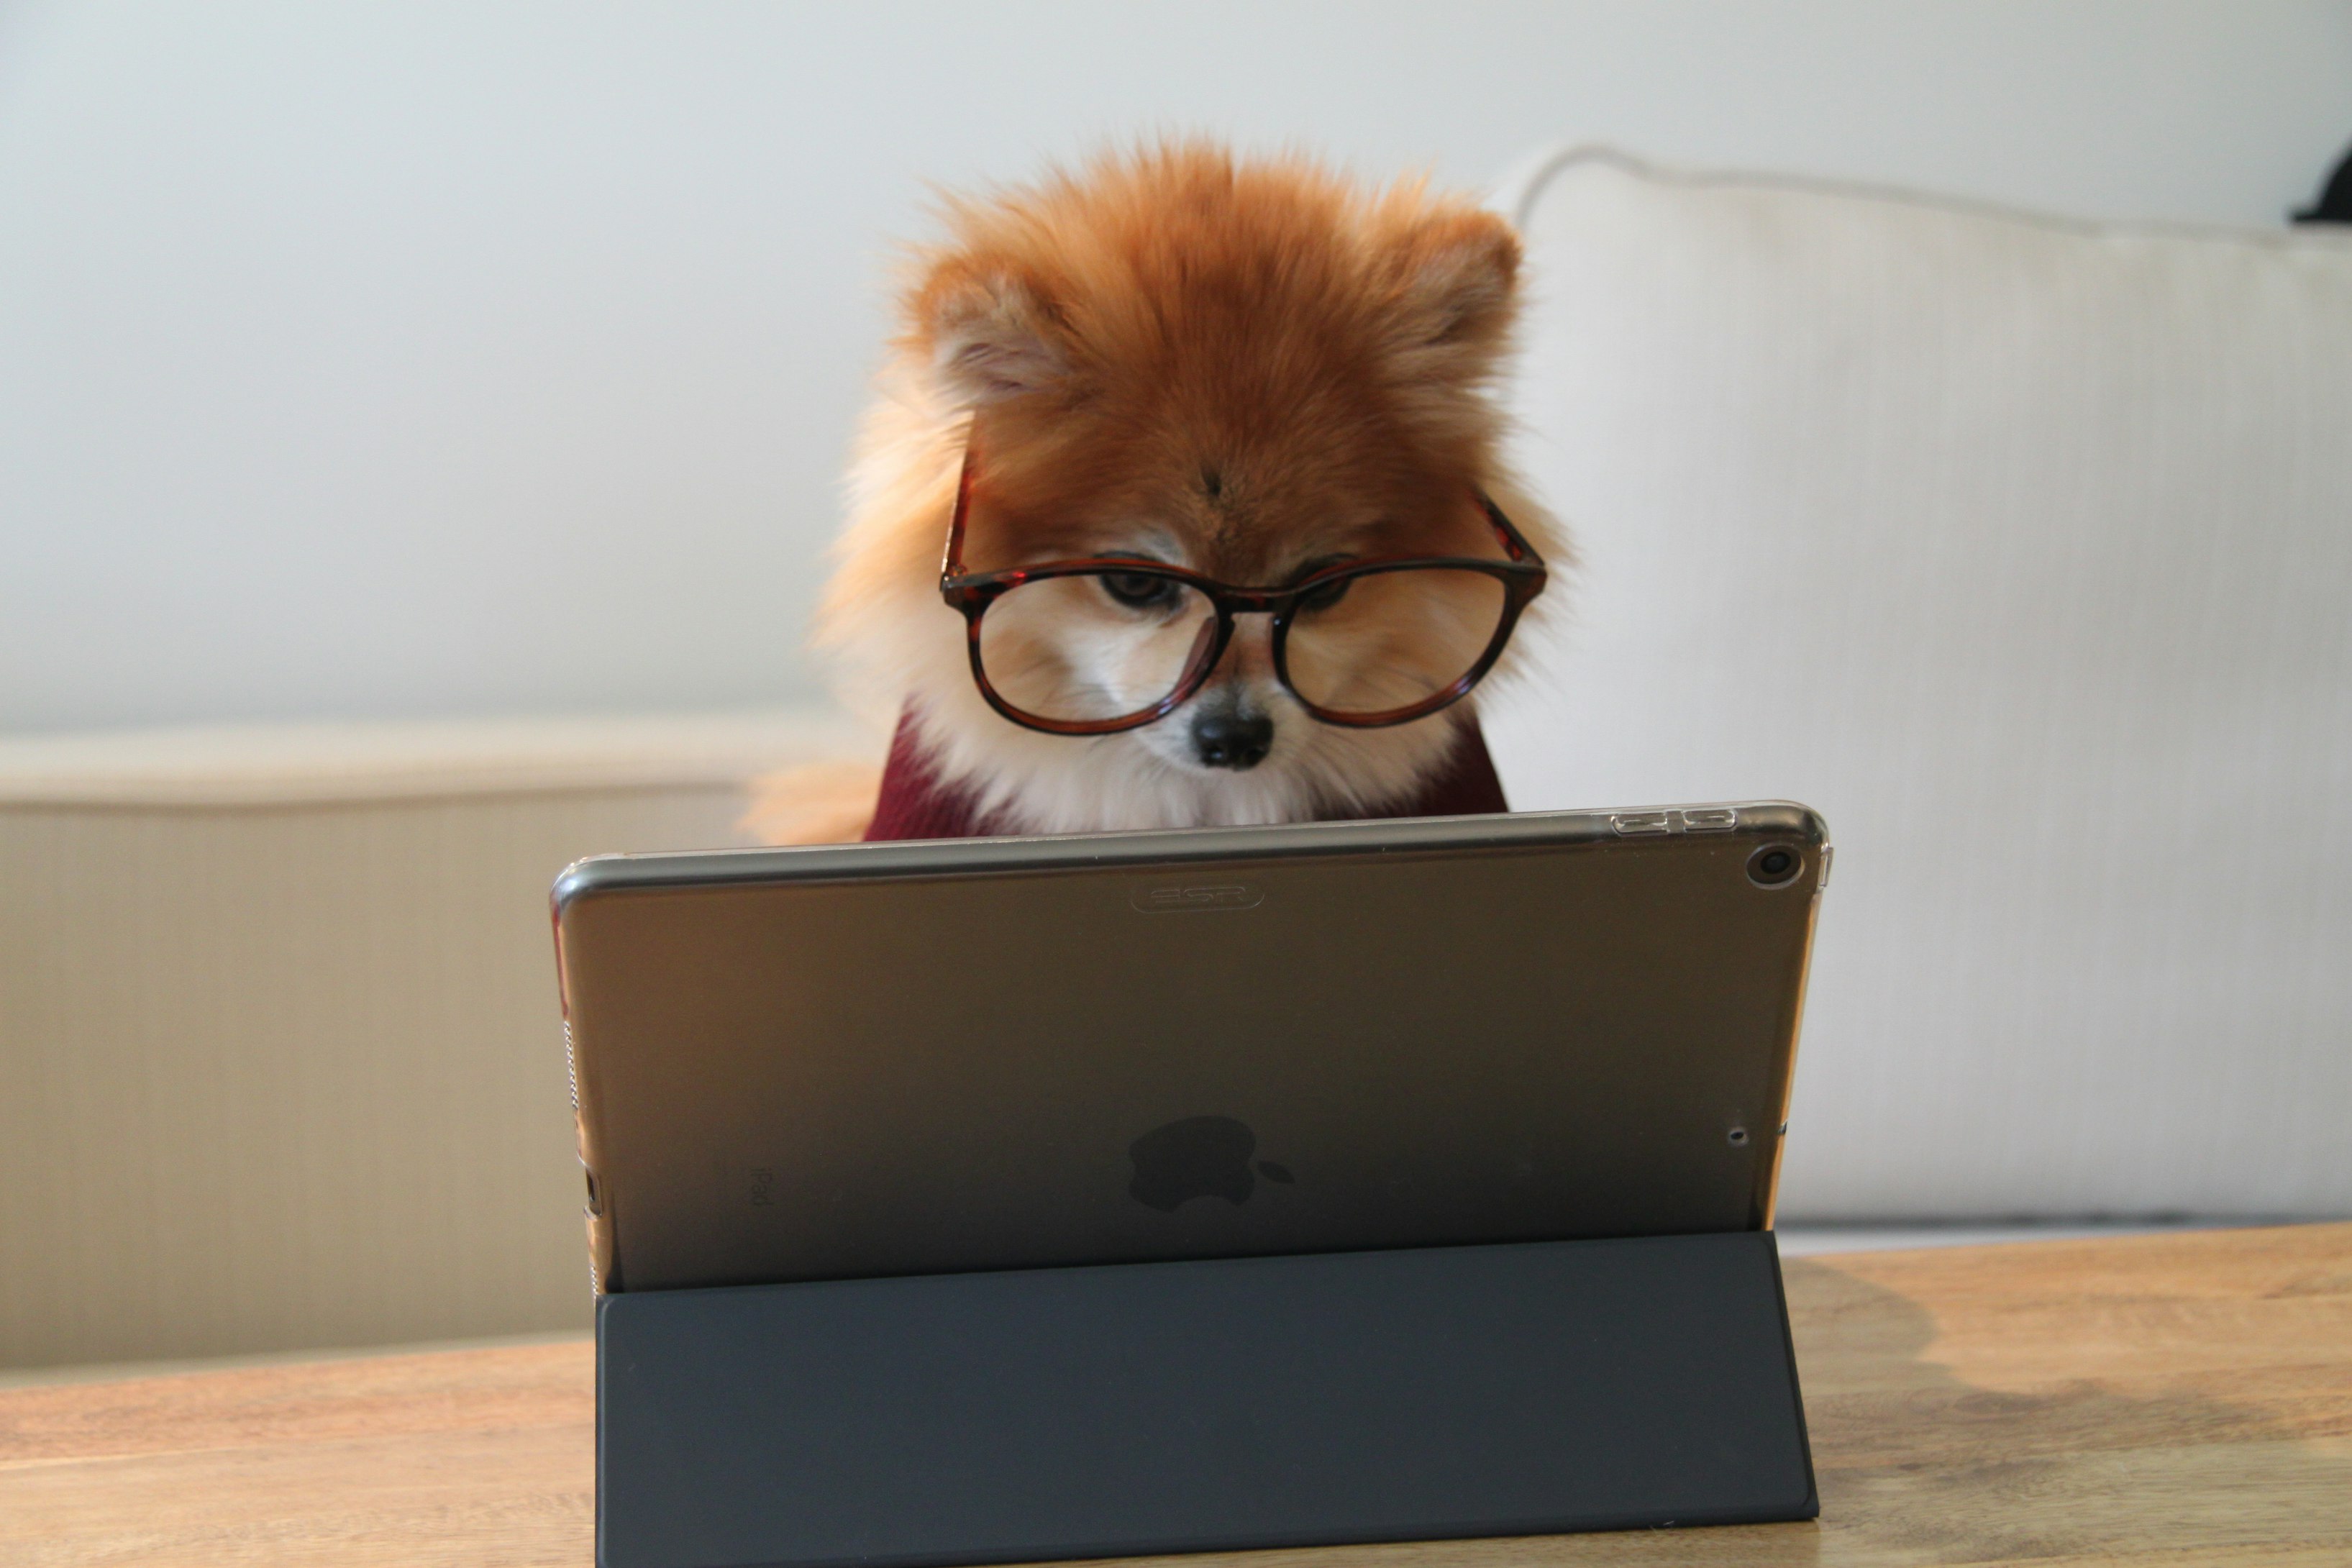 A sweet Pomeranian dog wearing glasses and quizically looking at her laptop screen